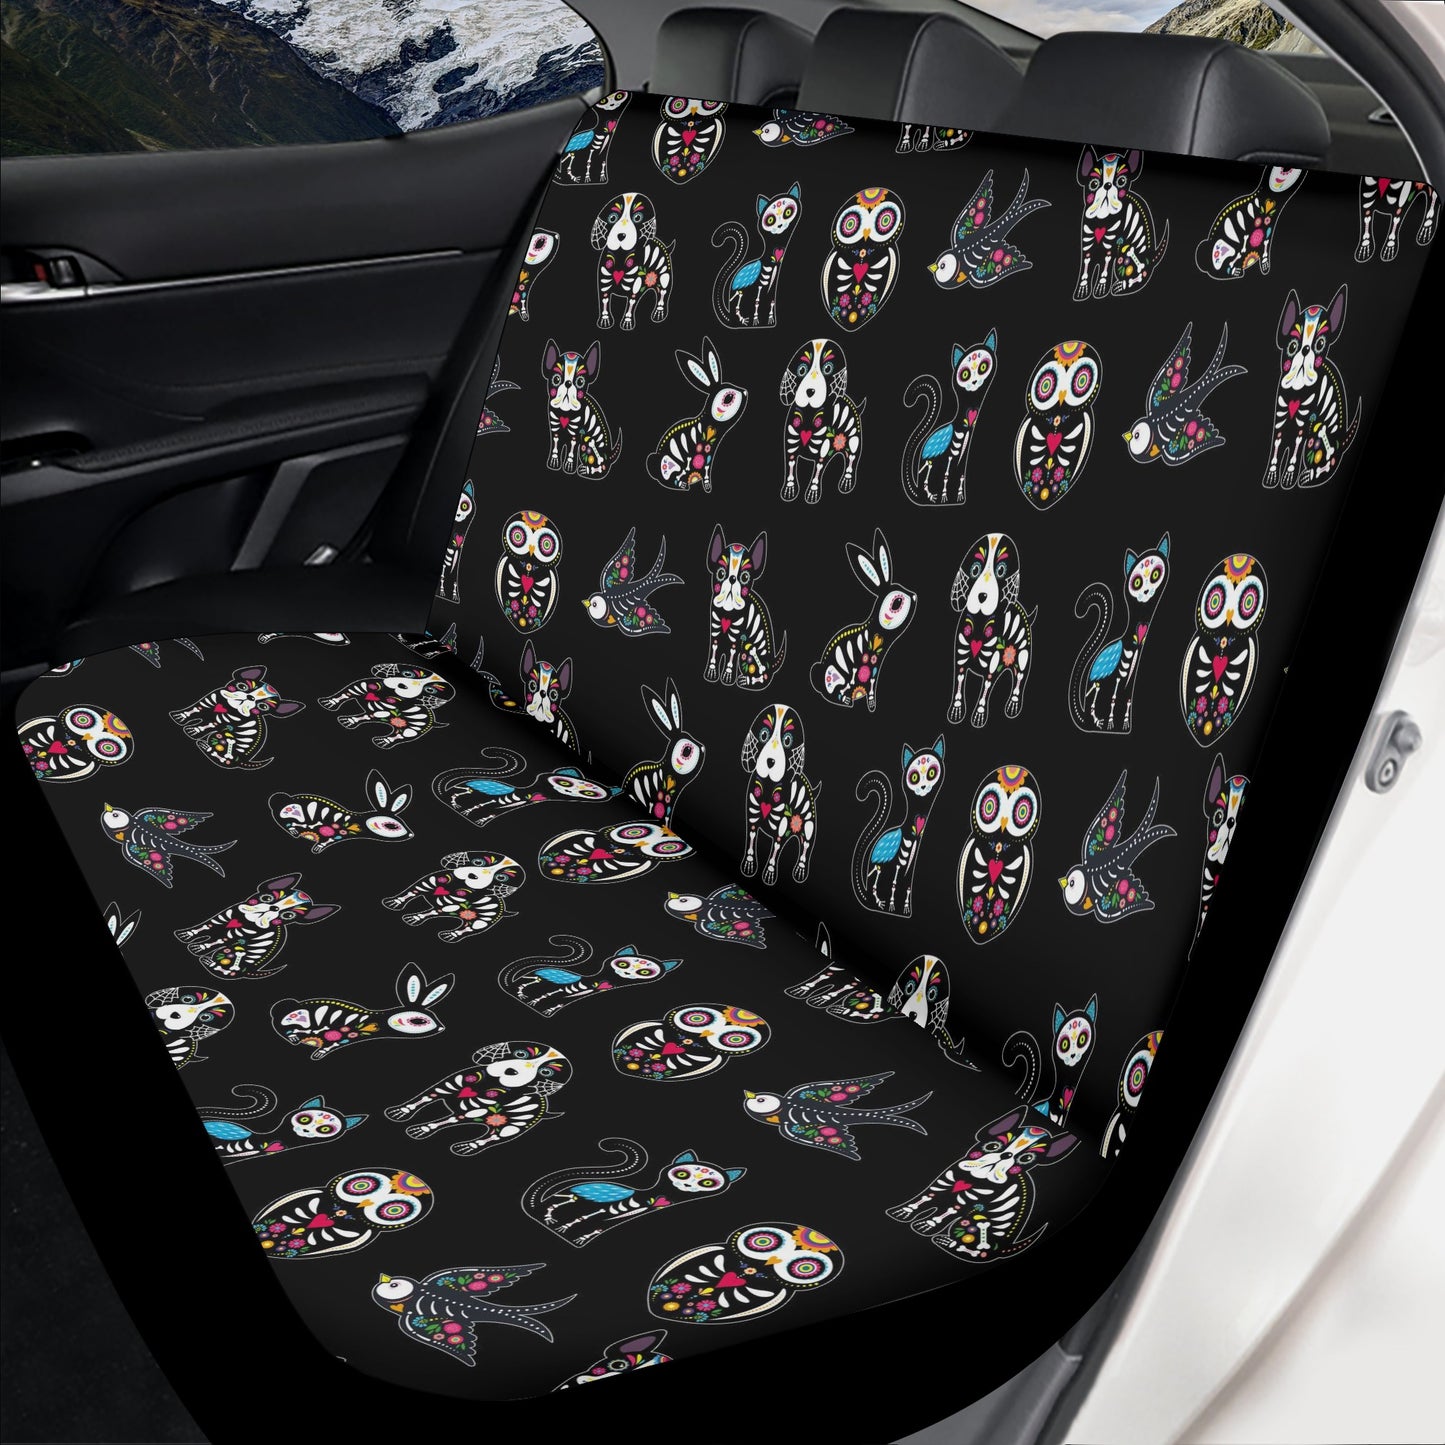 Mexico car accessories, calaveras skull car seat cover, mexican skull car seat cushion cover, calaveras skull seat cover for vehicles, day o